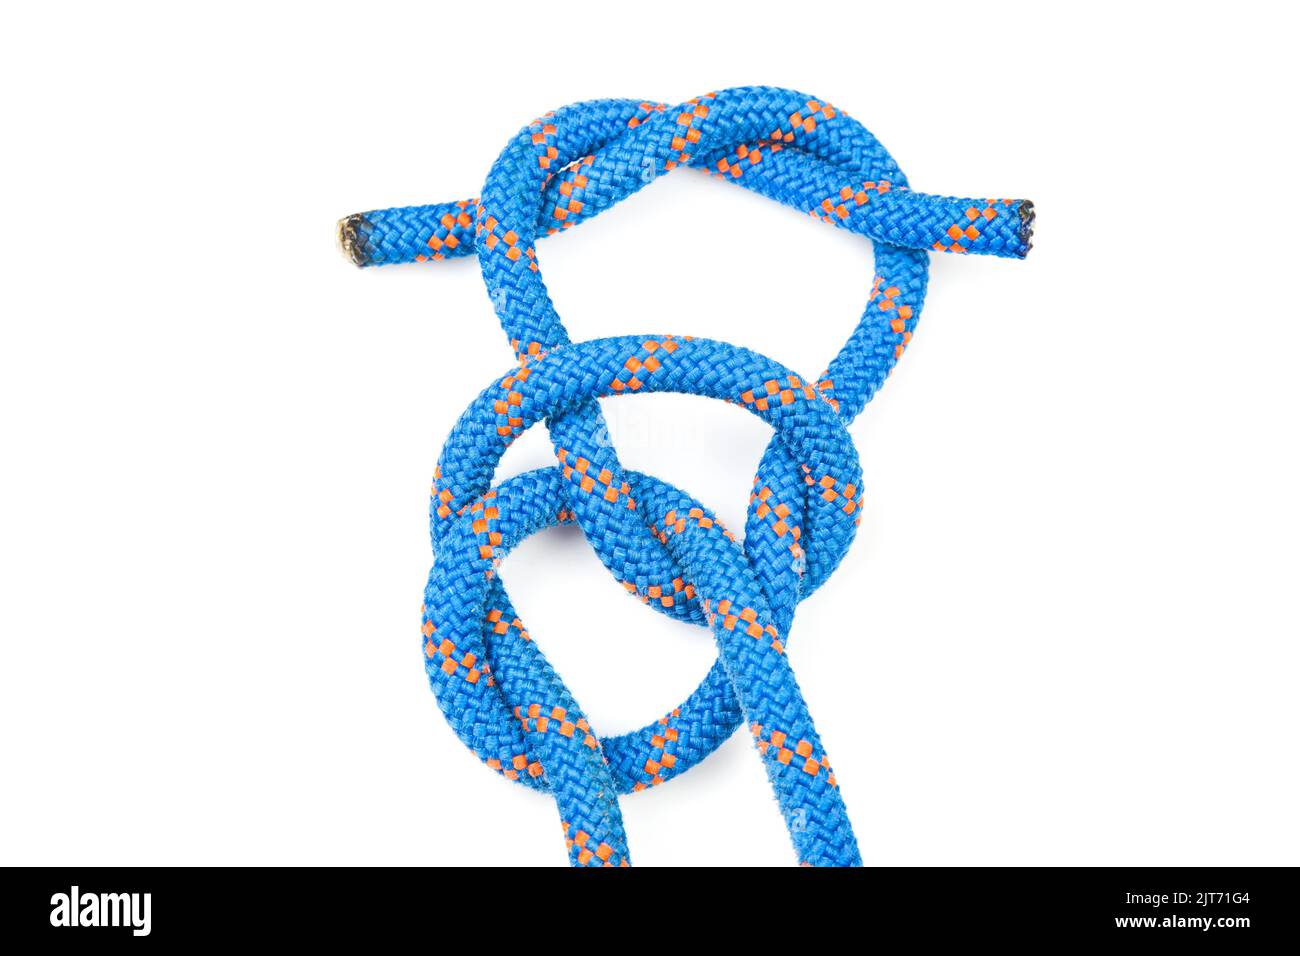 Climbing rope coil Cut Out Stock Images & Pictures - Page 2 - Alamy